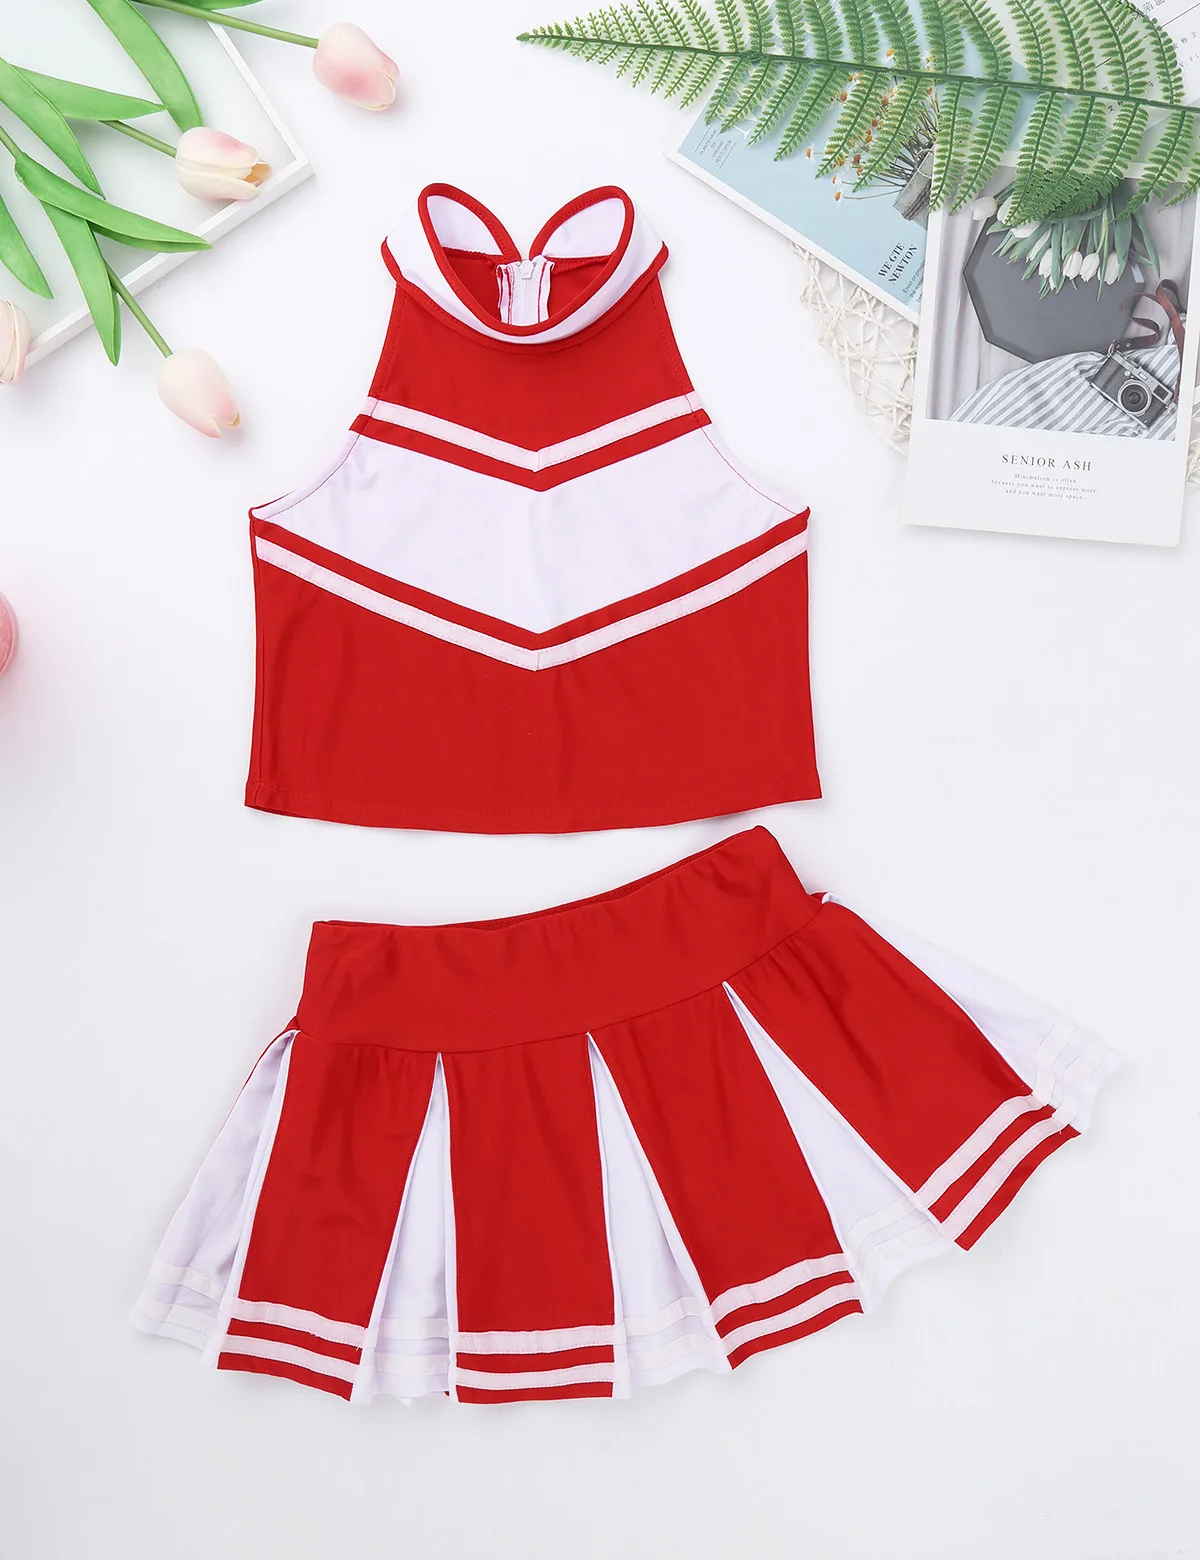 Kids Girls Cheerleading Costume Cheerleader Outfit Sleeveless Zippered Tops with Pleated Skirt Set School Girls Cosplay Party